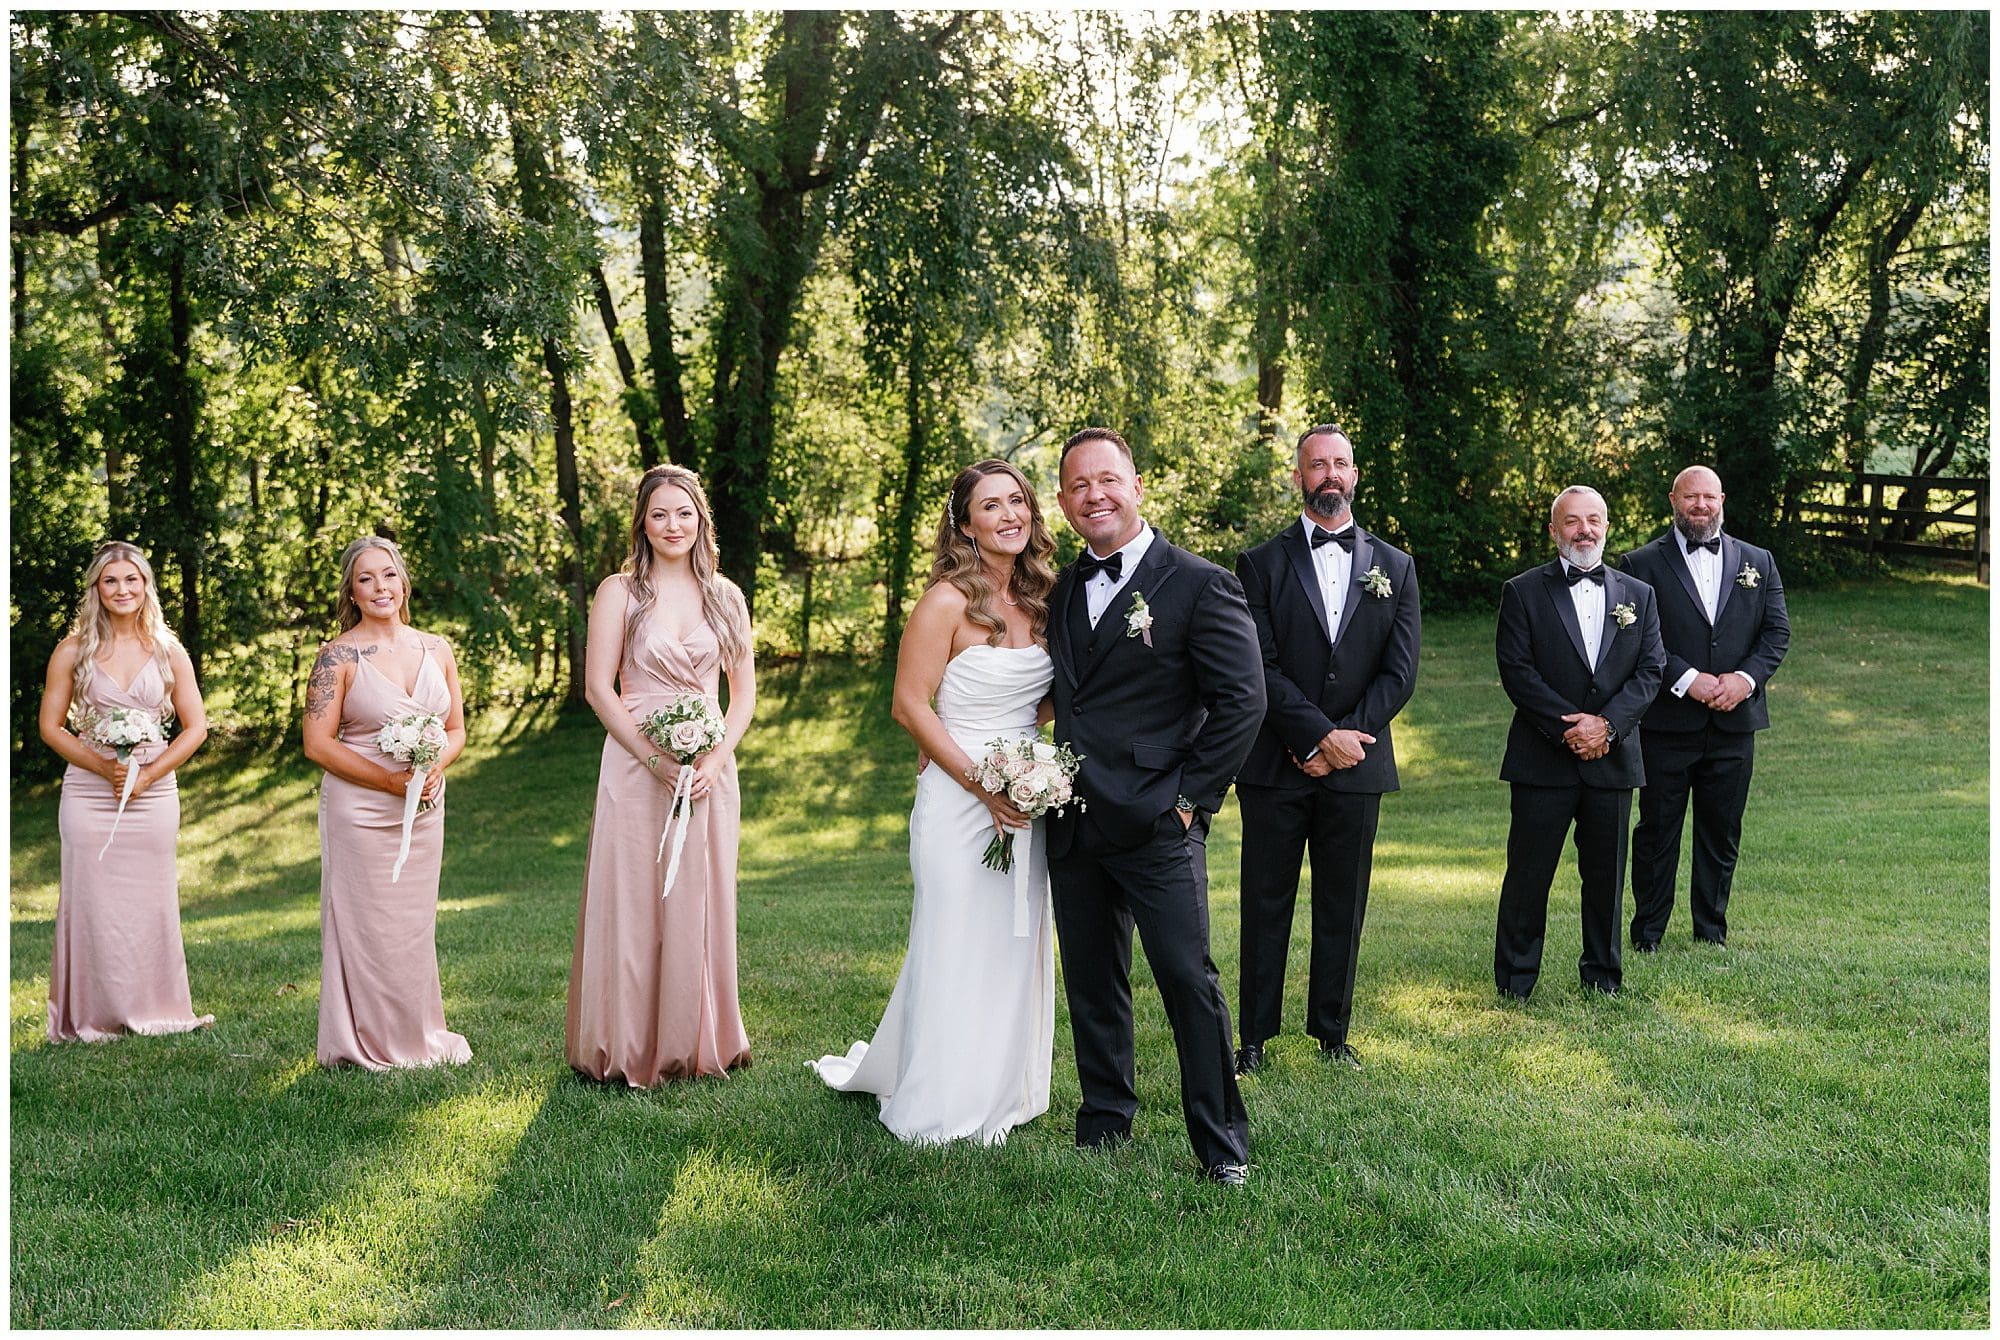 Wedding party in field with gorgeous sunlight behind them at this July wedding at the Farm 